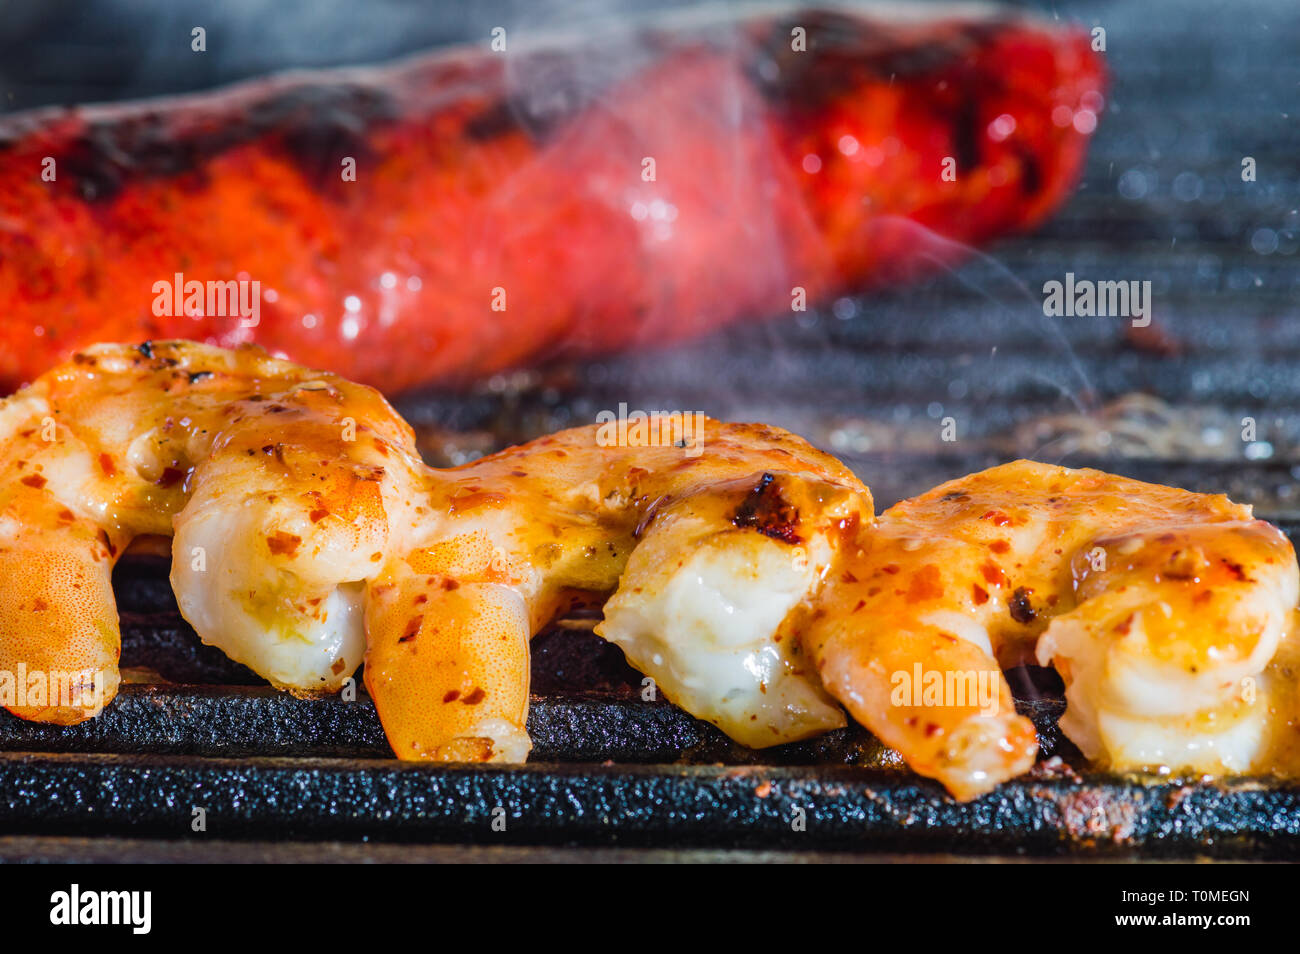 Grill Room High Resolution Stock Photography and Images - Alamy